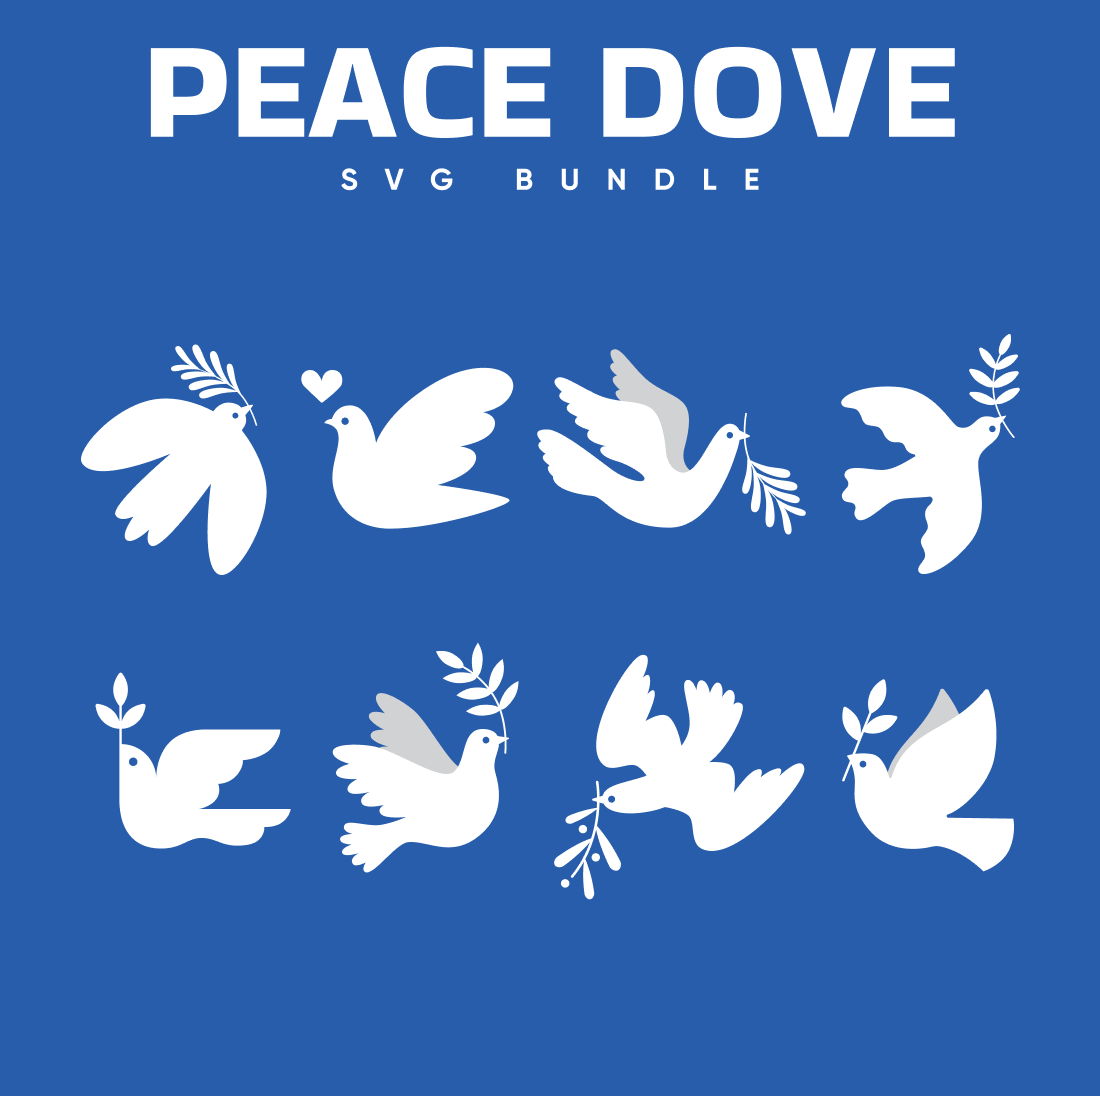 Blue background with white silhouettes of doves.